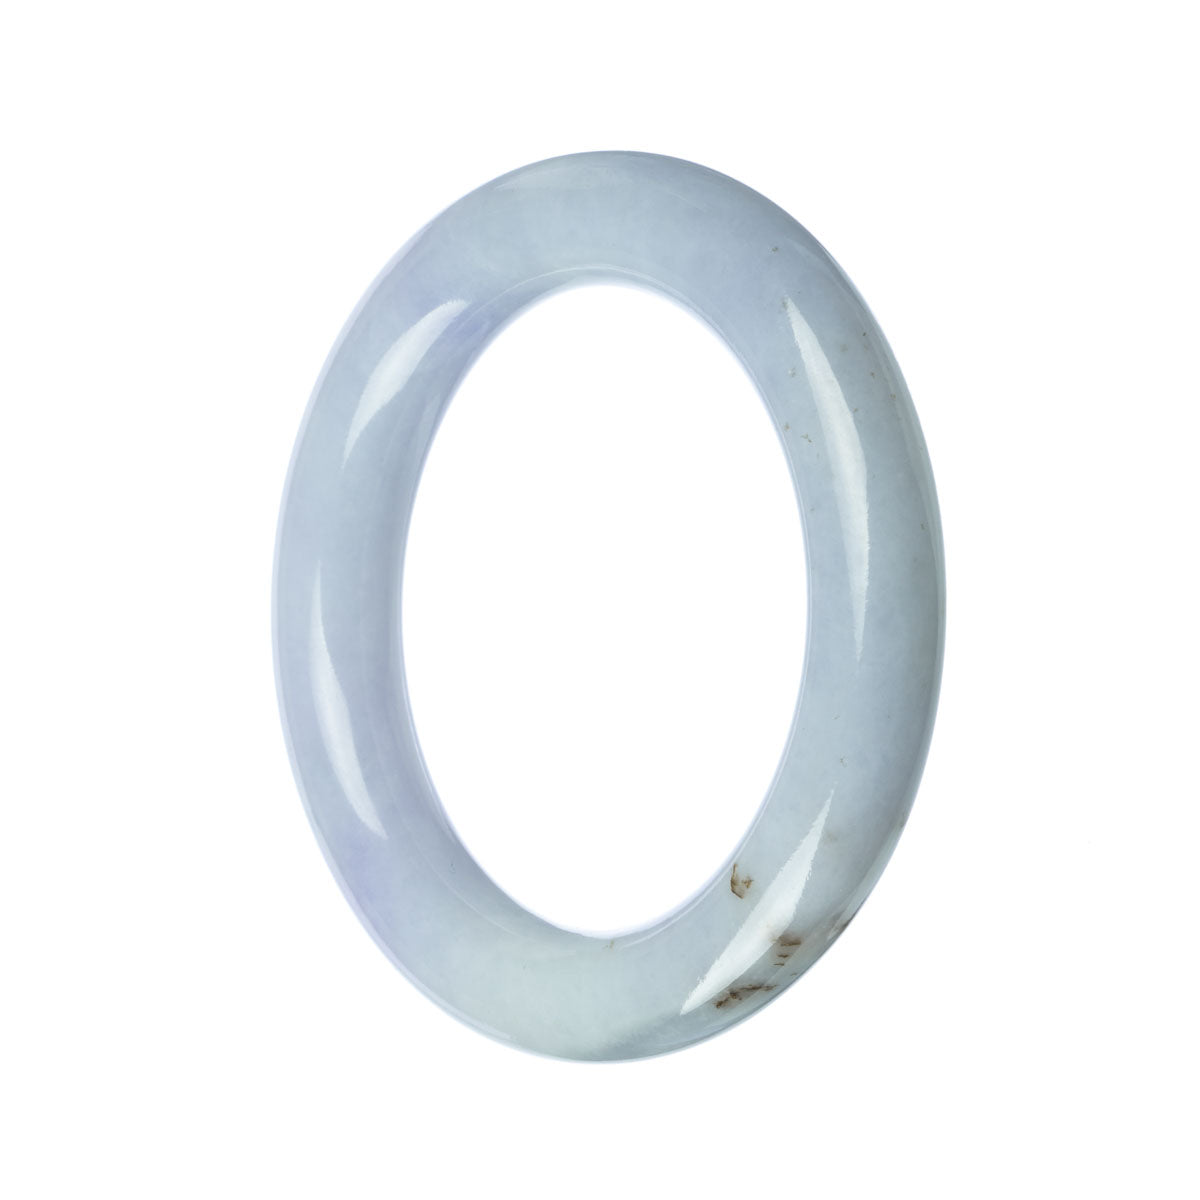 A round lavender jade bangle, measuring 57mm in diameter. The bangle is made of genuine Grade A lavender jade and is sold by the brand MAYS.